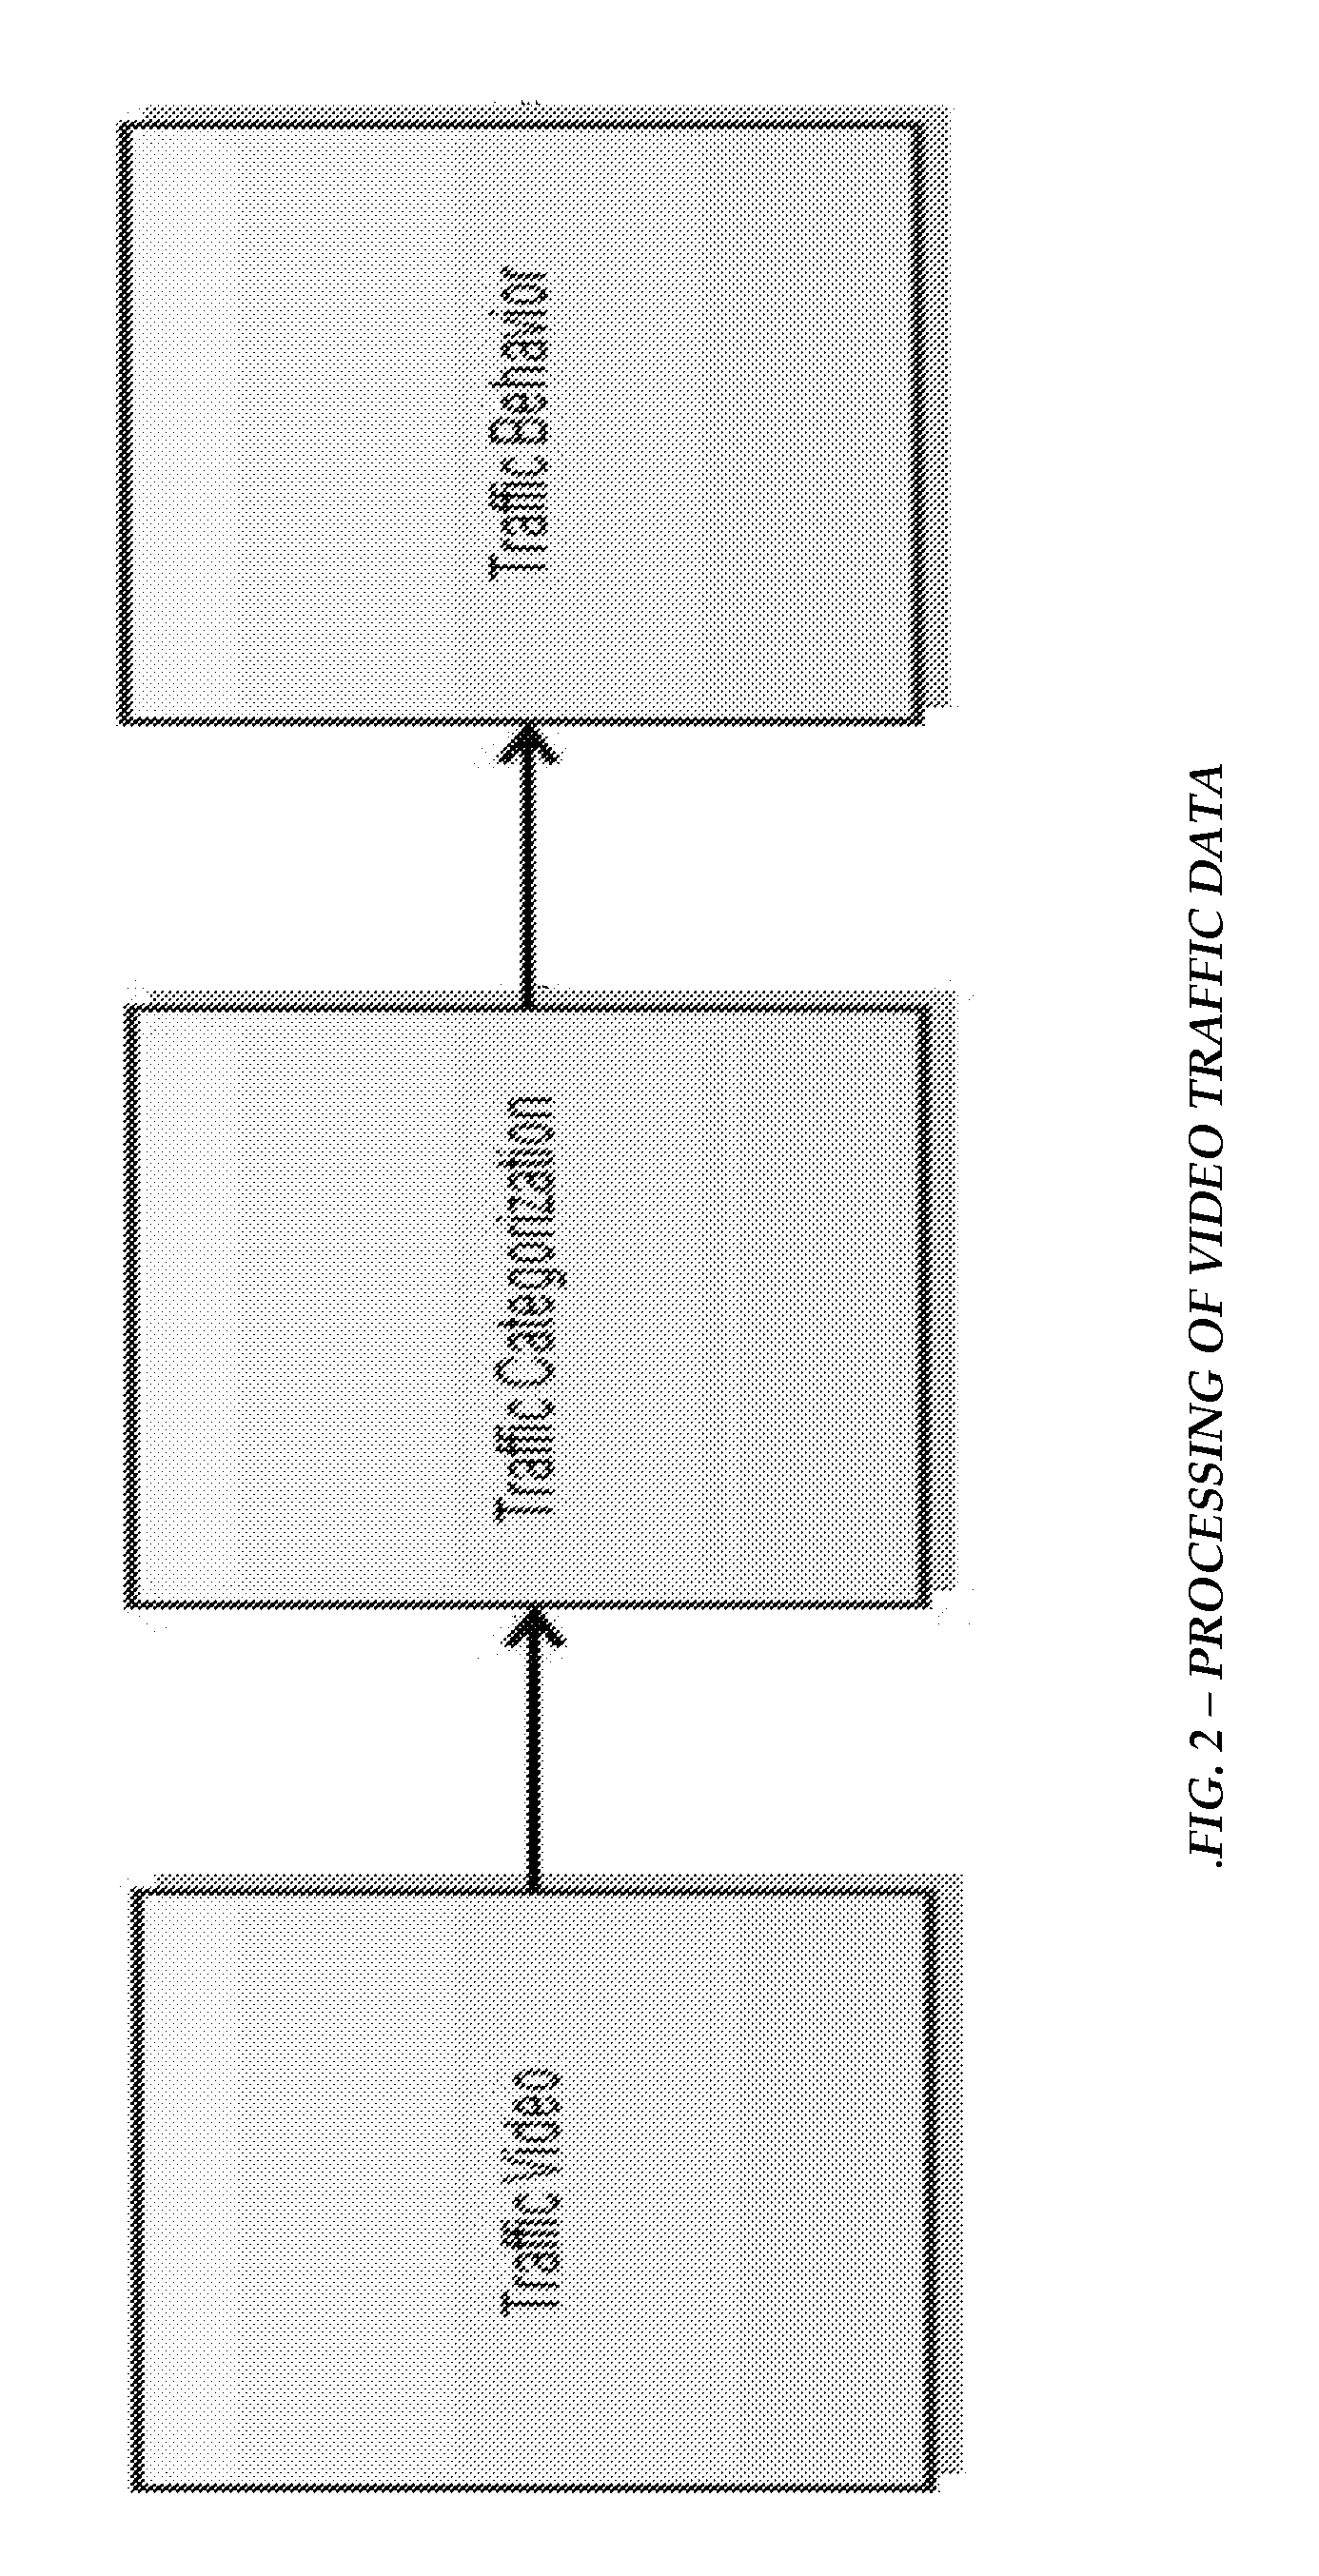 System and Method for Measurement, Planning, Monitoring, and Execution of Out-of-Home Media